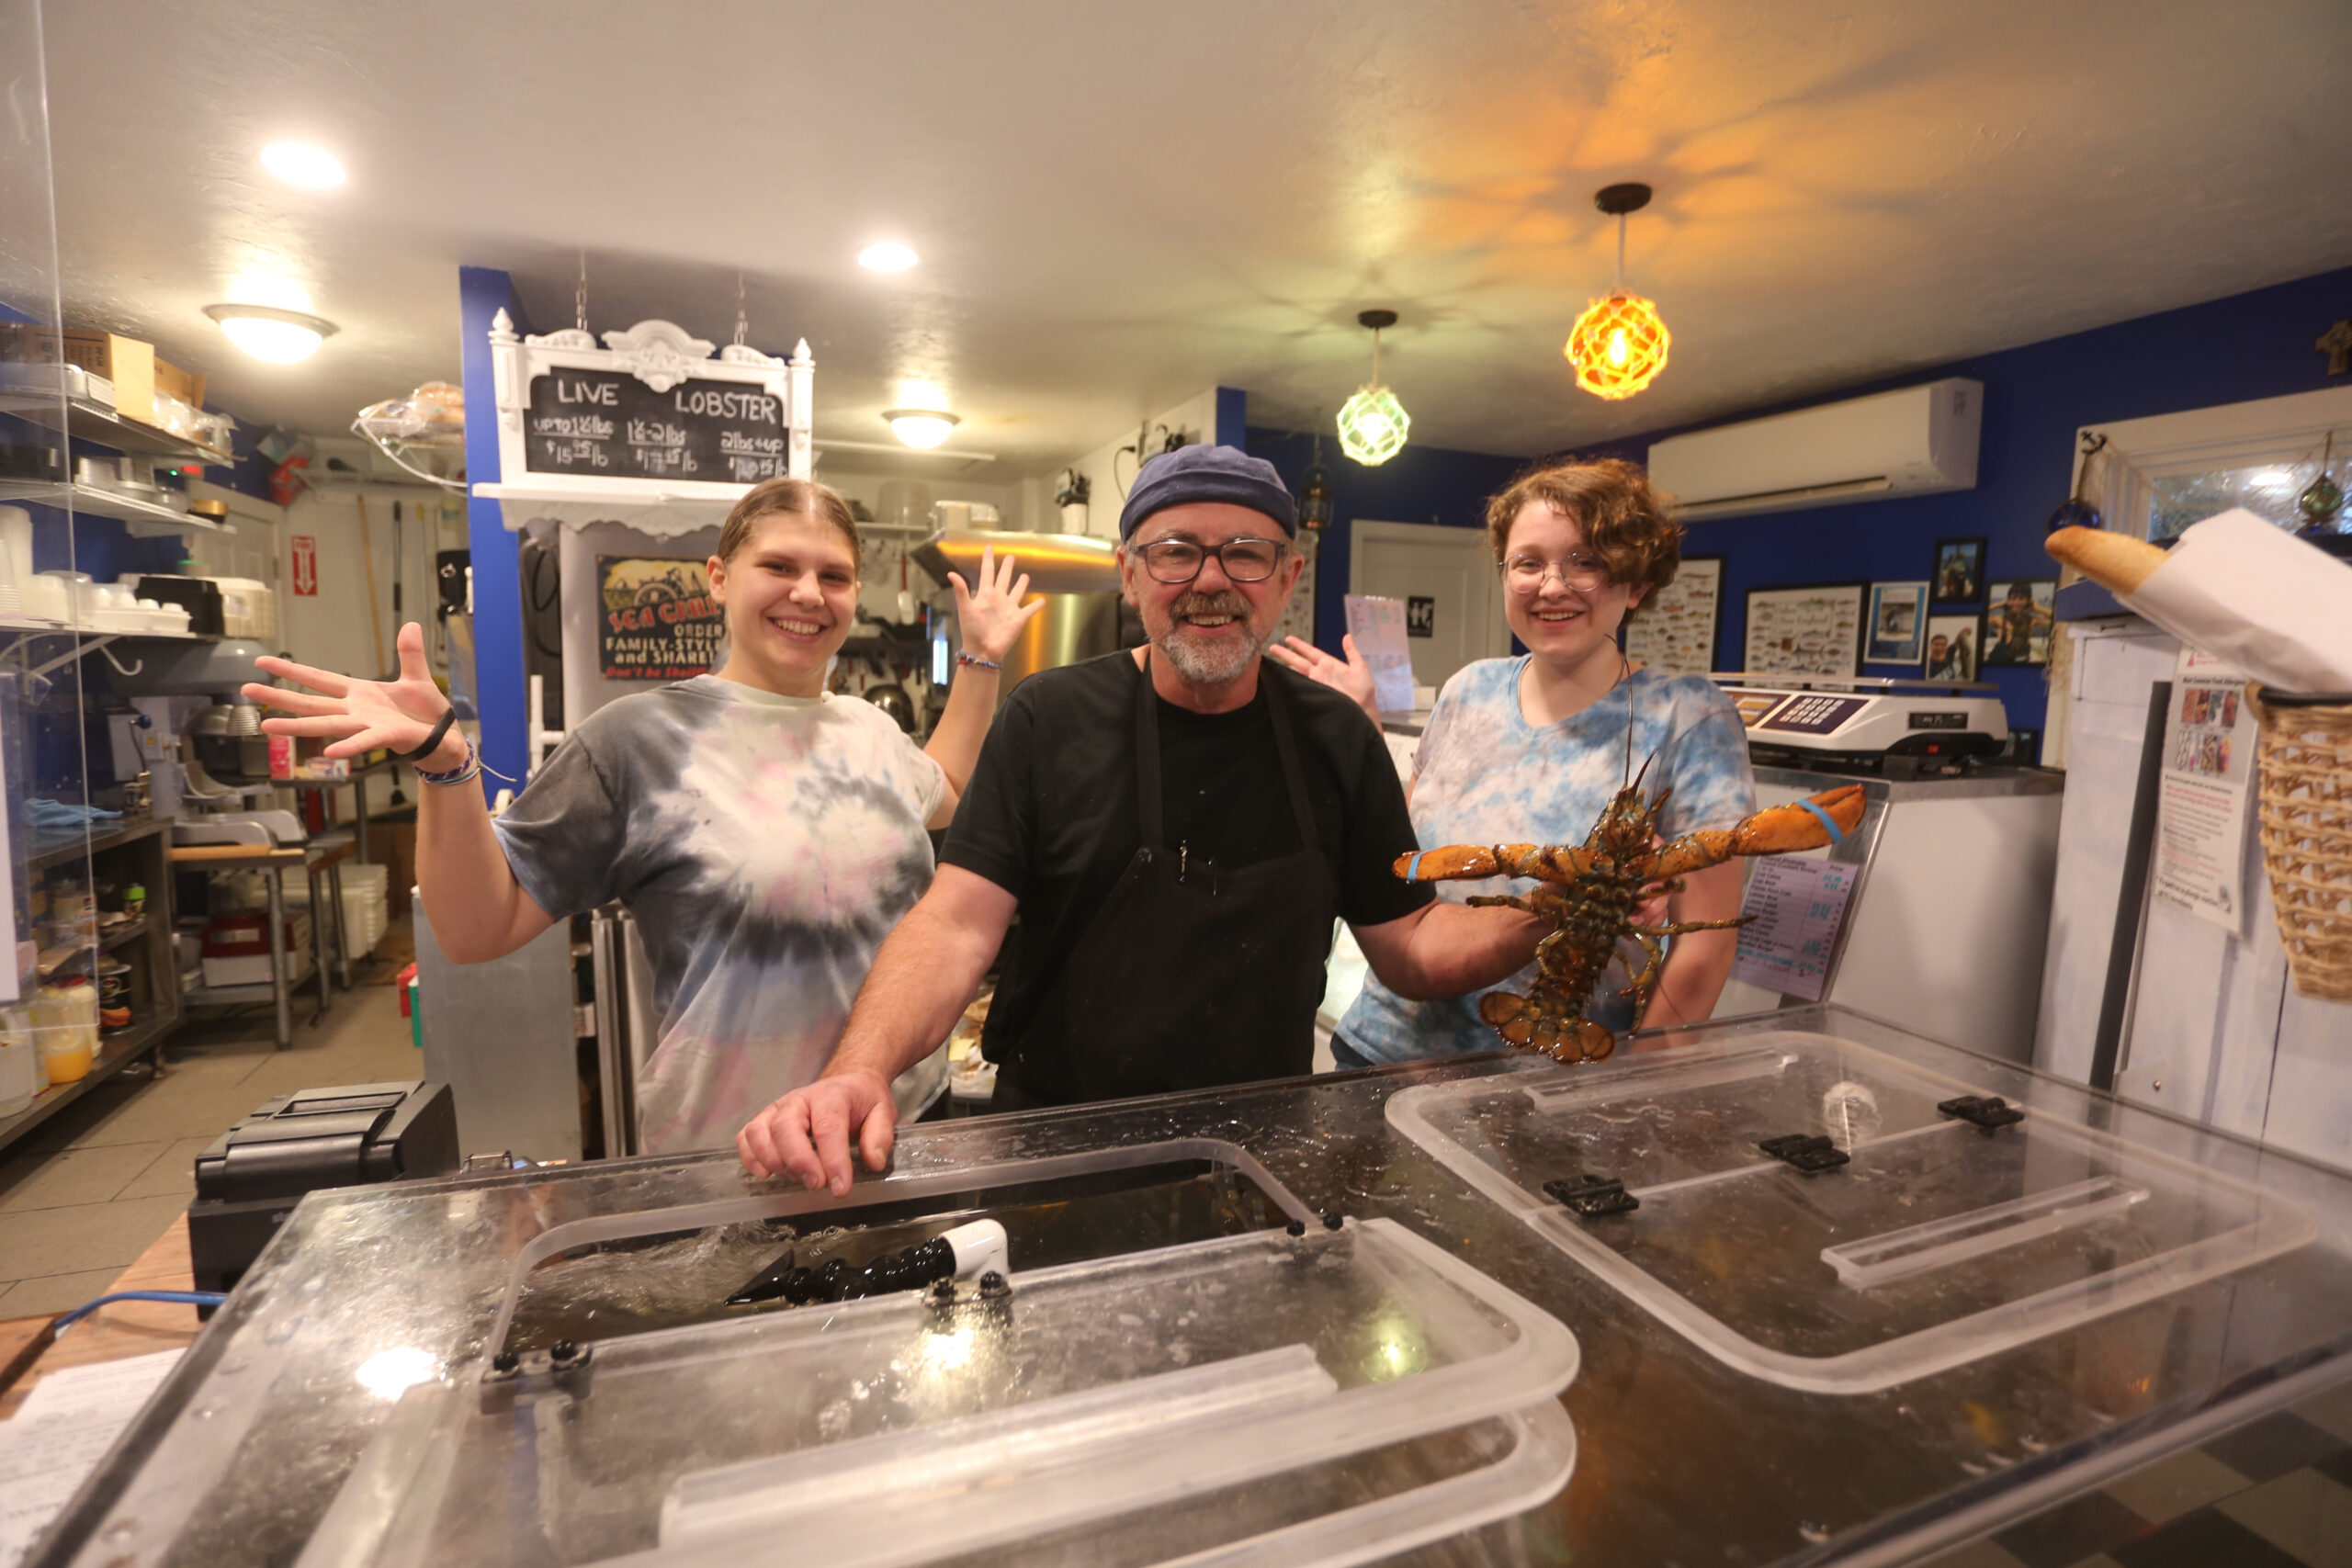 Morgan’s Harbor to Hill a one-stop shop for fresh seafood, meals